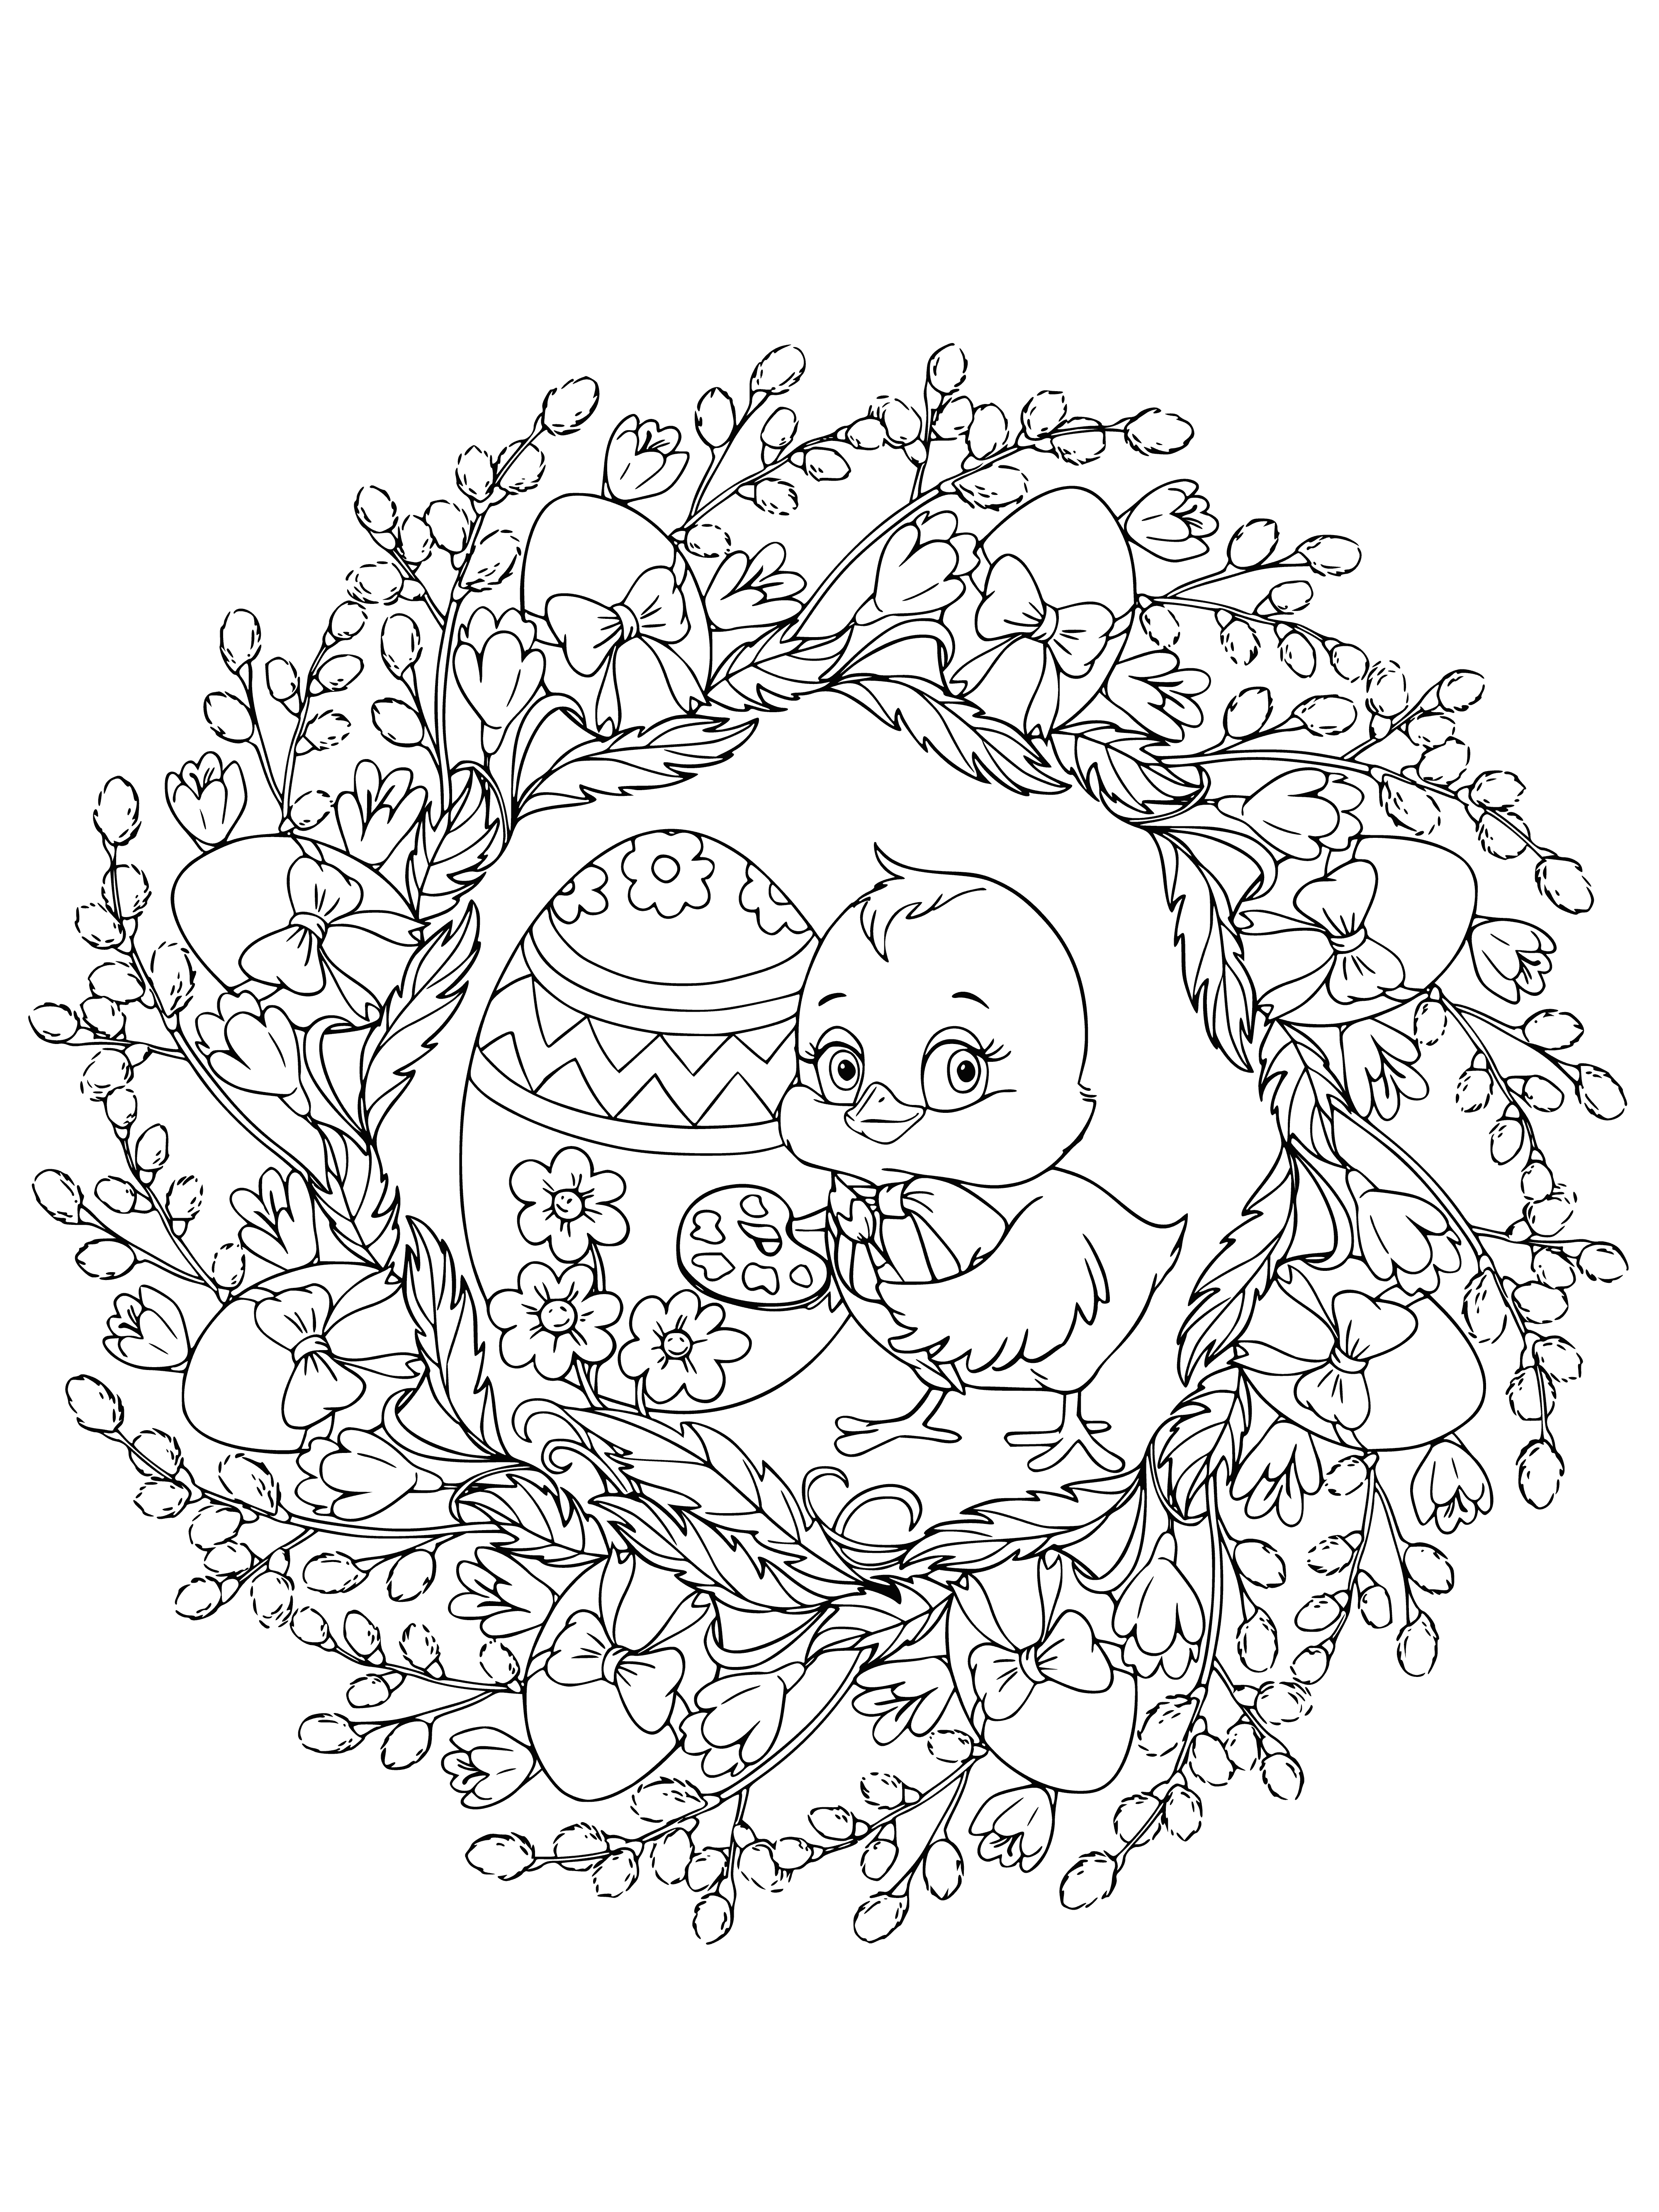 coloring page: Coloring pages feature Easter bunny, basket of eggs, nest w/ eggs, bunny & egg. #Easter #coloringpages